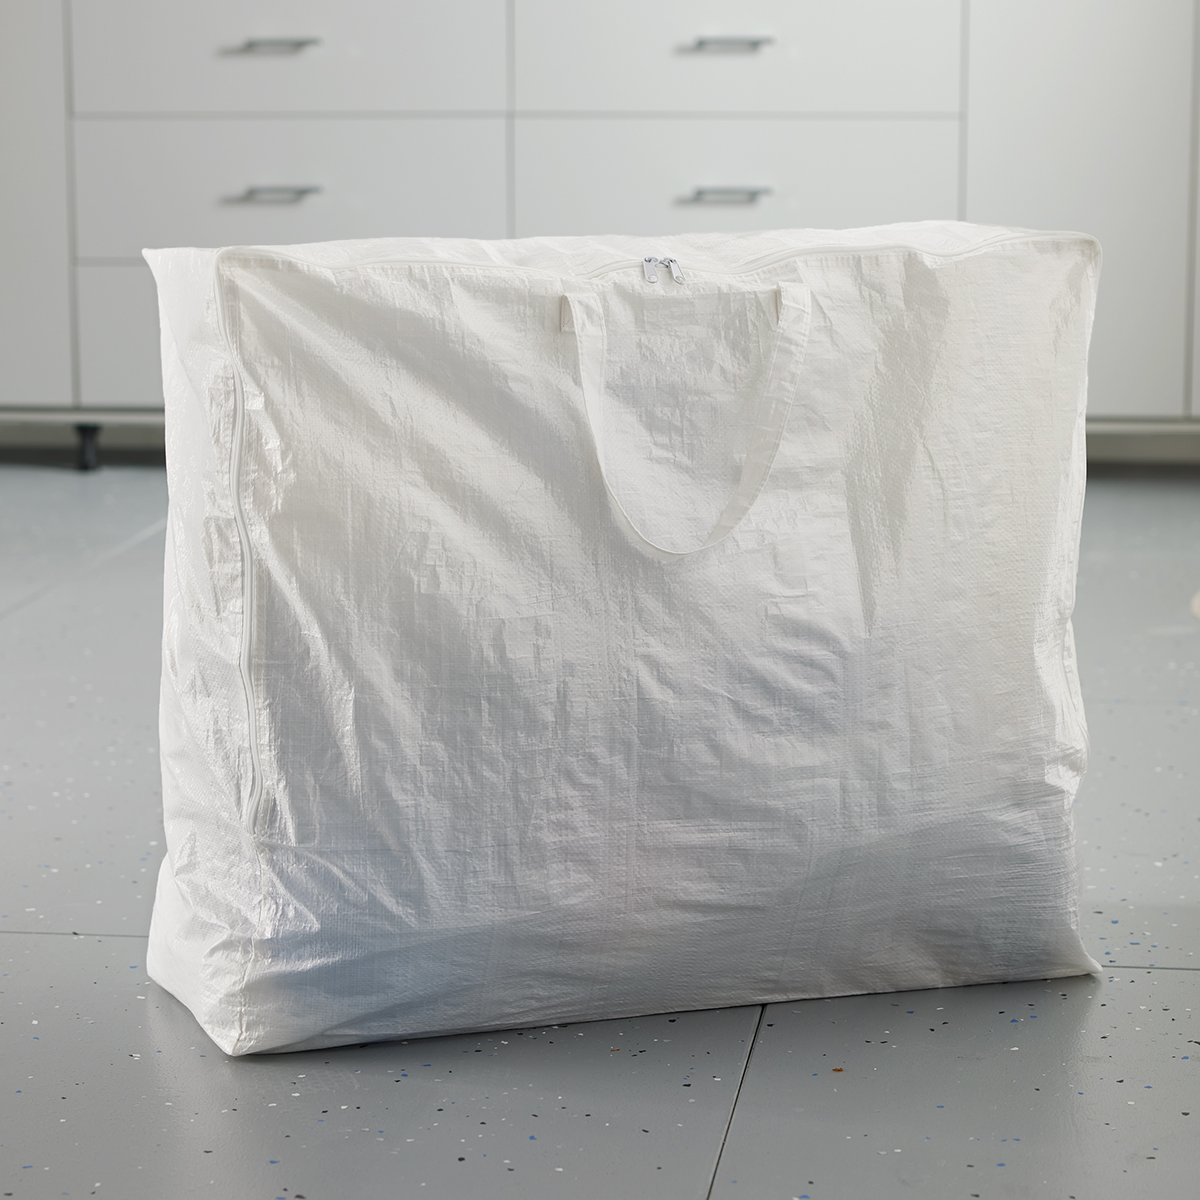 https://www.containerstore.com/catalogimages/515625/100913373-all-purpose-storage-bag-30.jpg